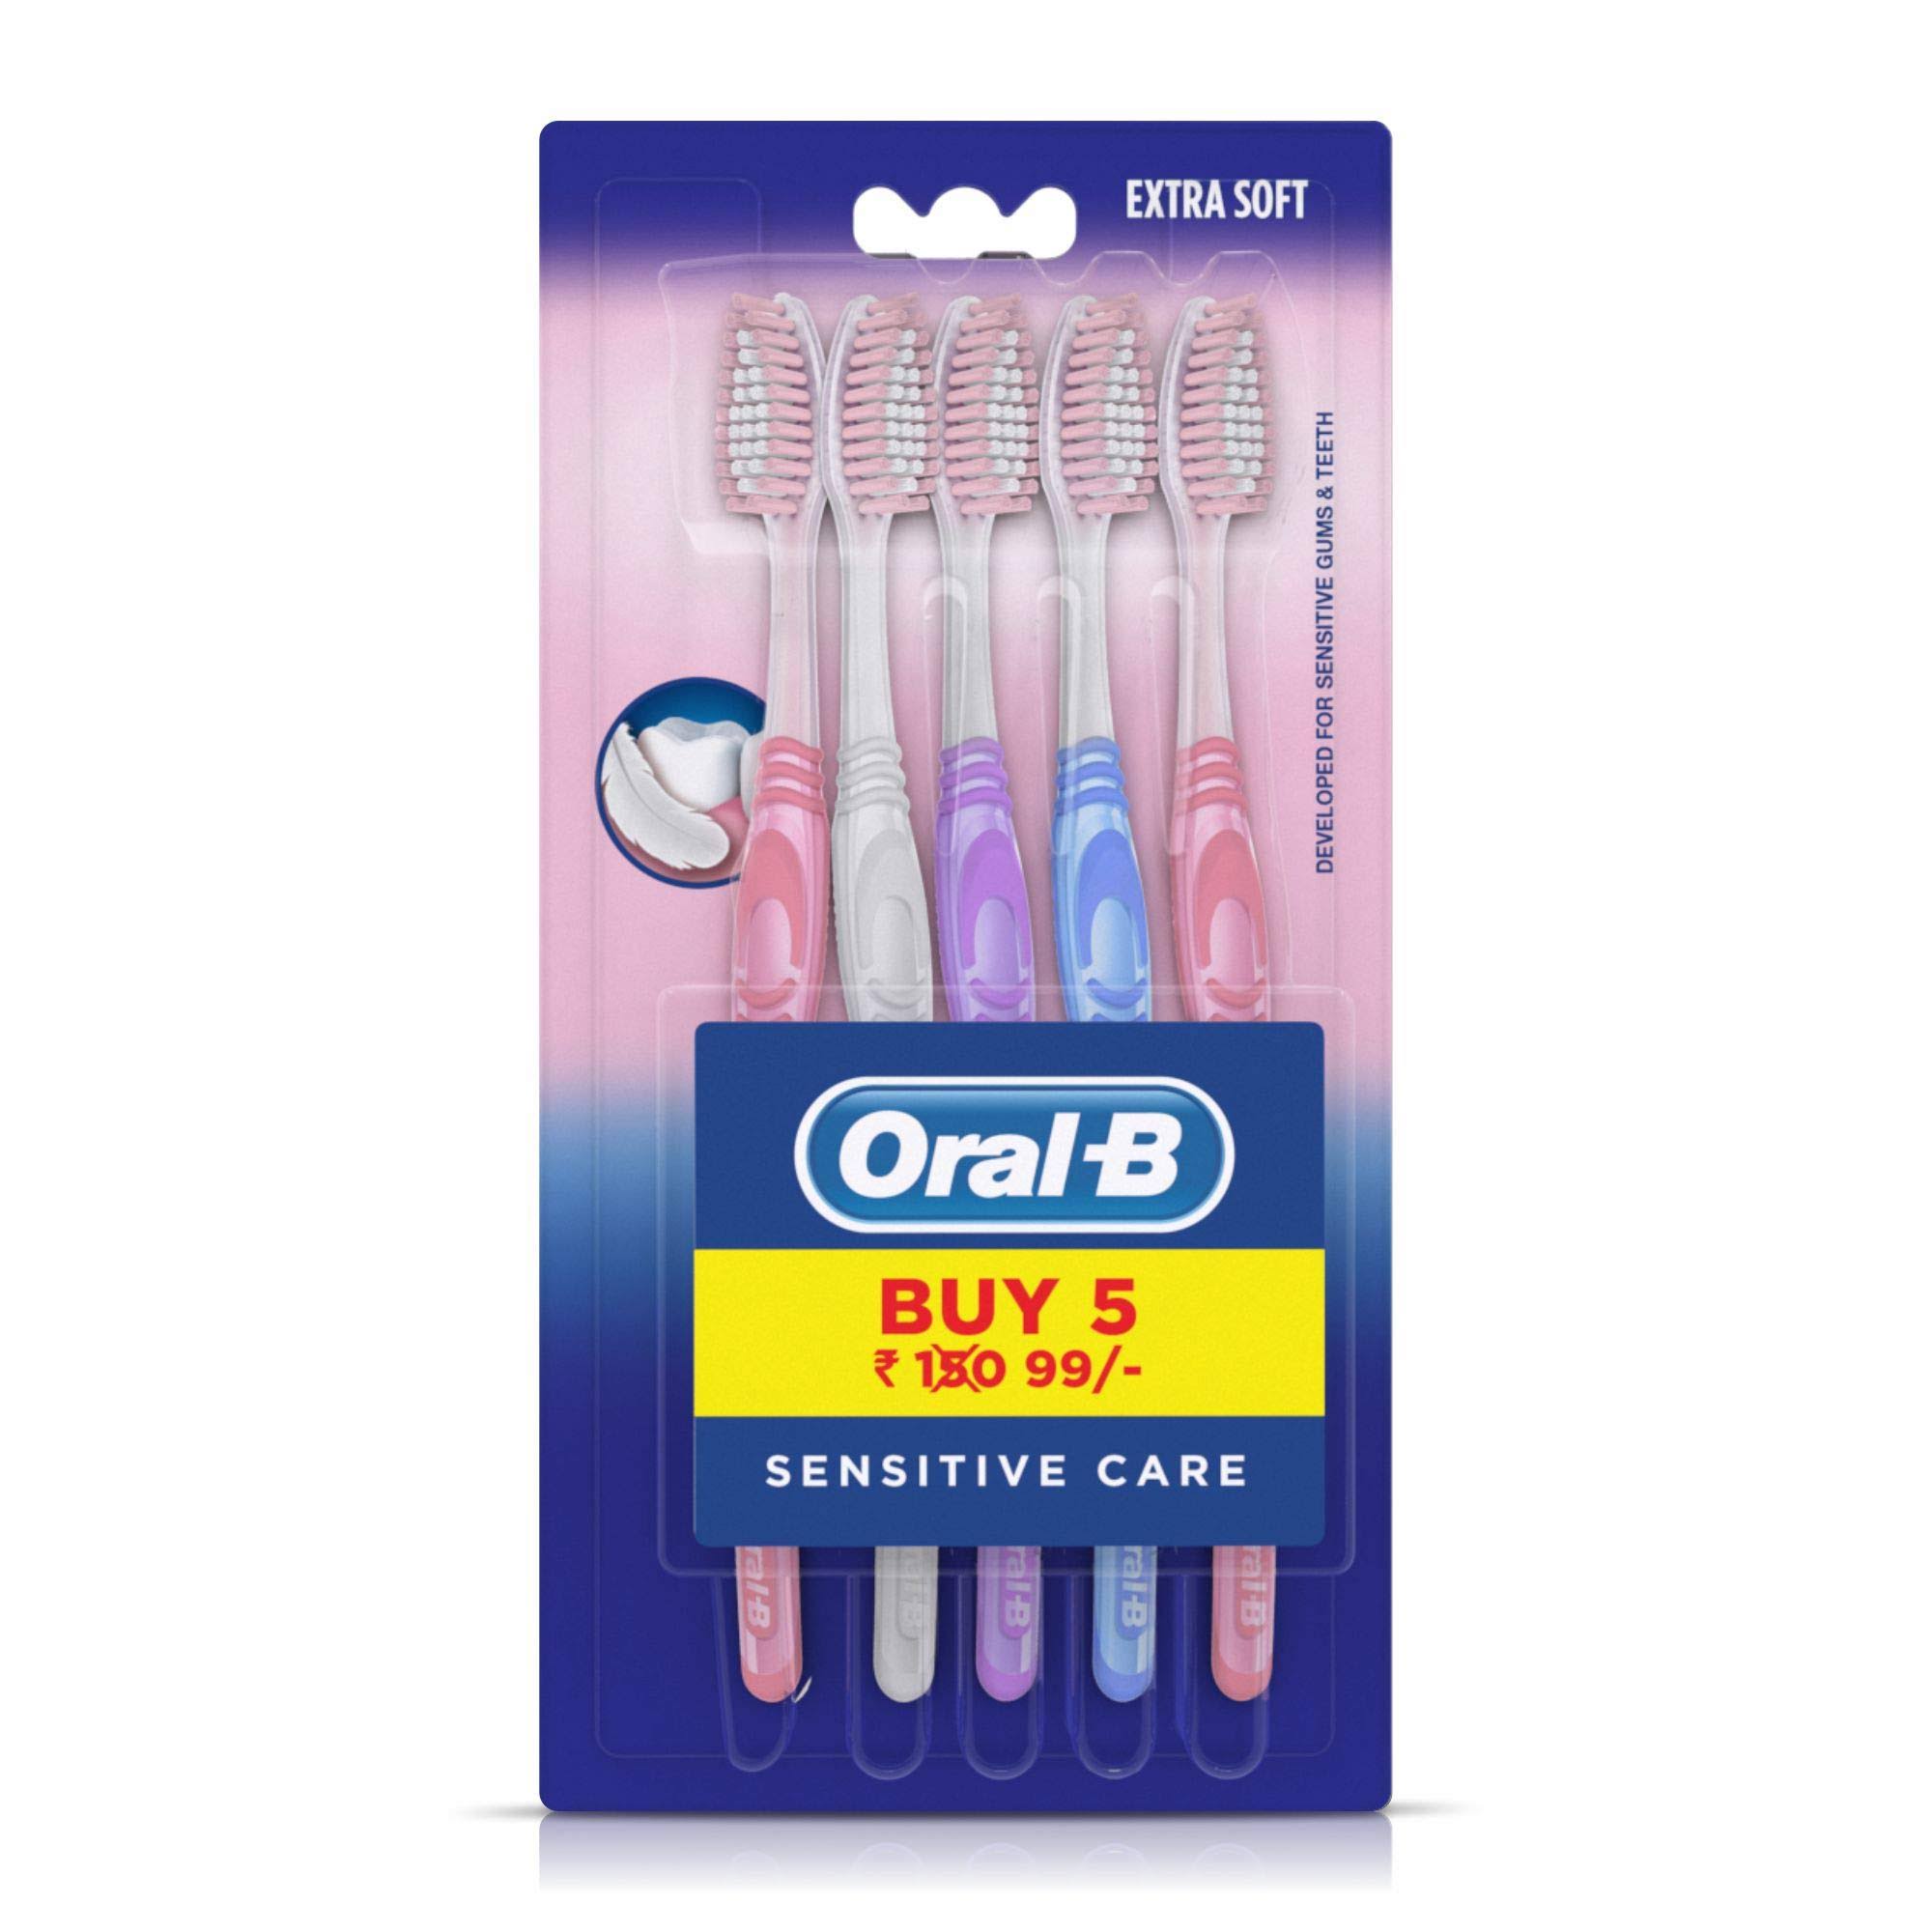 Oral B Sensitive Care Toothbrush, Extra Soft (Pack of 5)